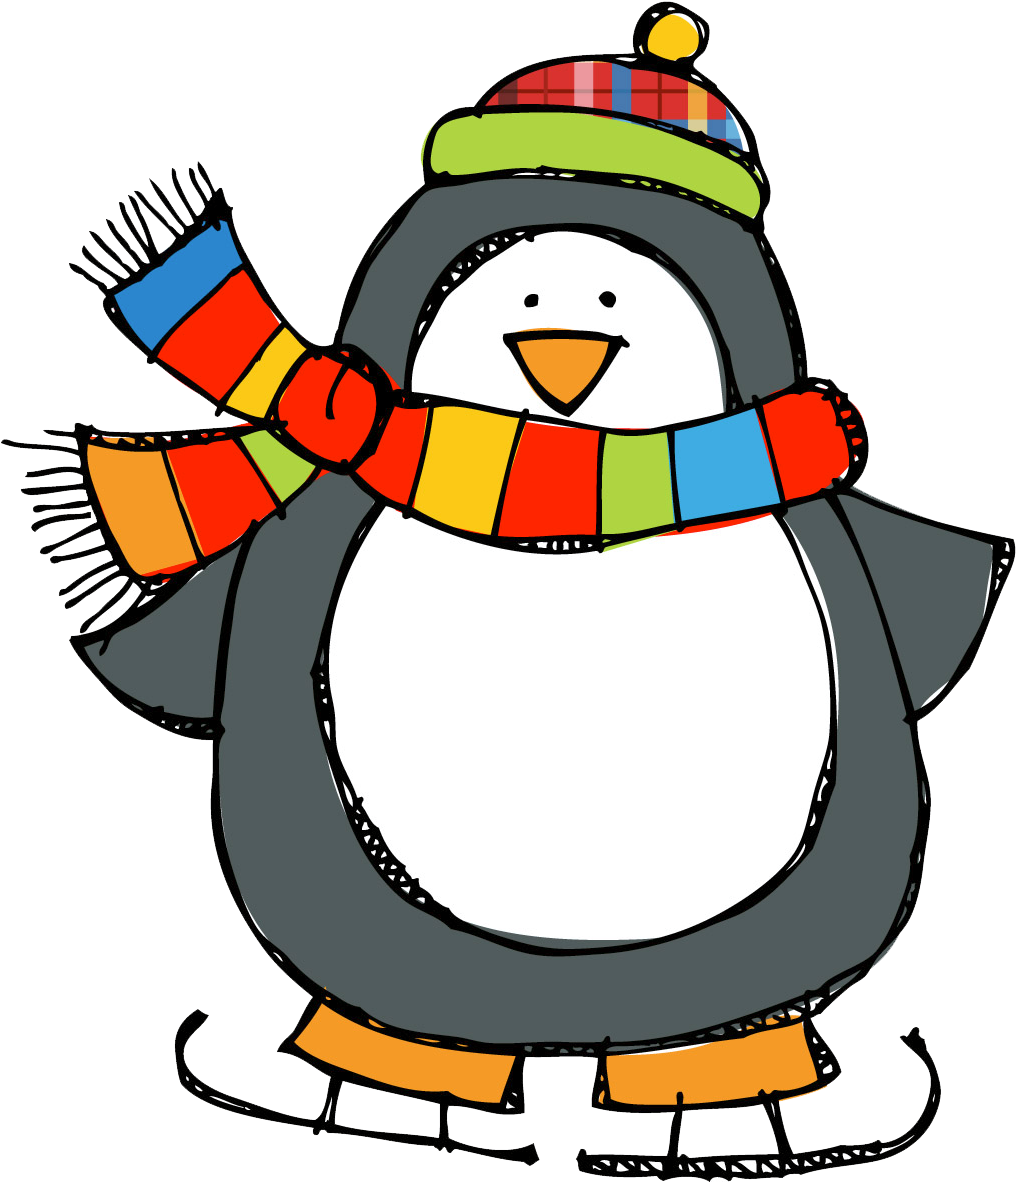 You Get Get Your Registraton Form [here] - Free Penguin Clip Art (1018x1190)